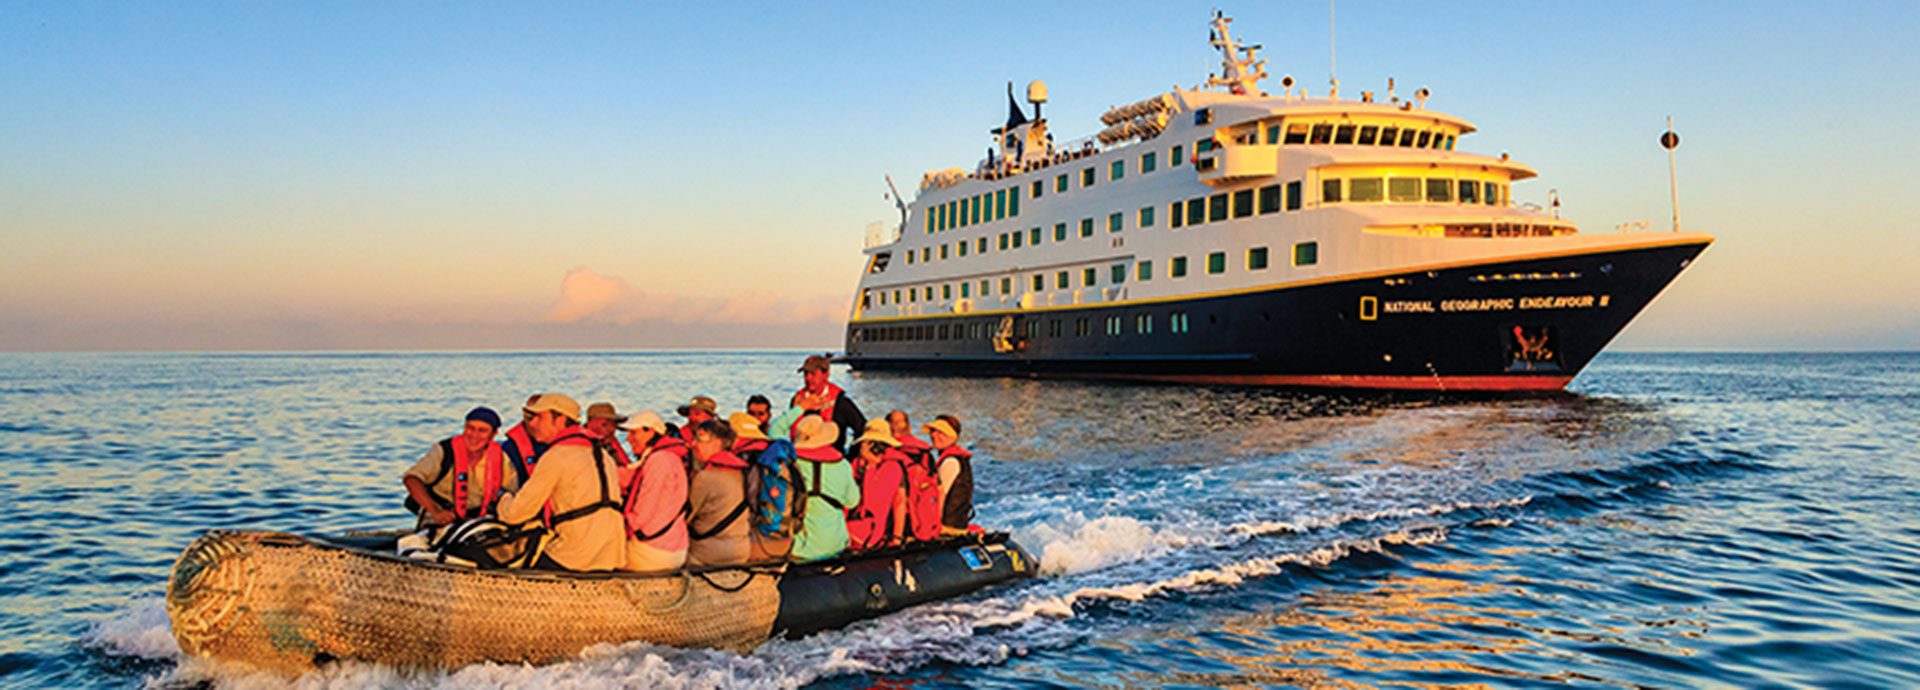 zodiac excursion whilst on a Galapagos cruise with Lindblad's National Geographic explorer